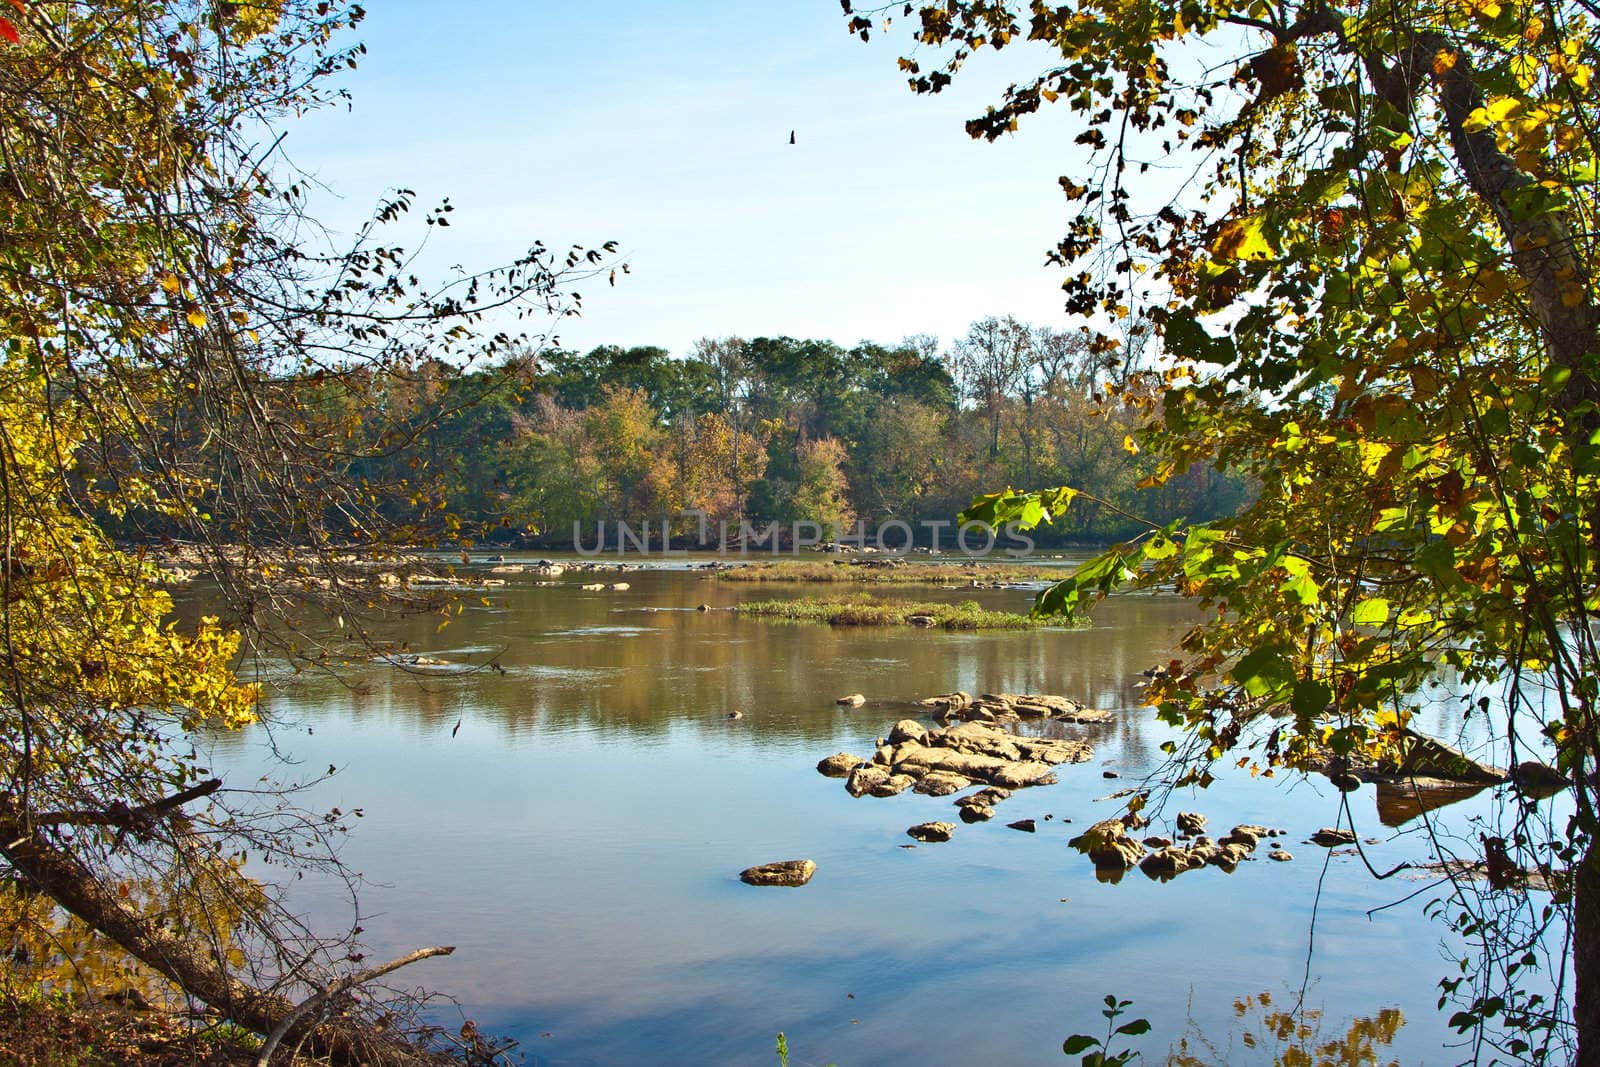 View of the Catawba River facing east at Landsford Canal.